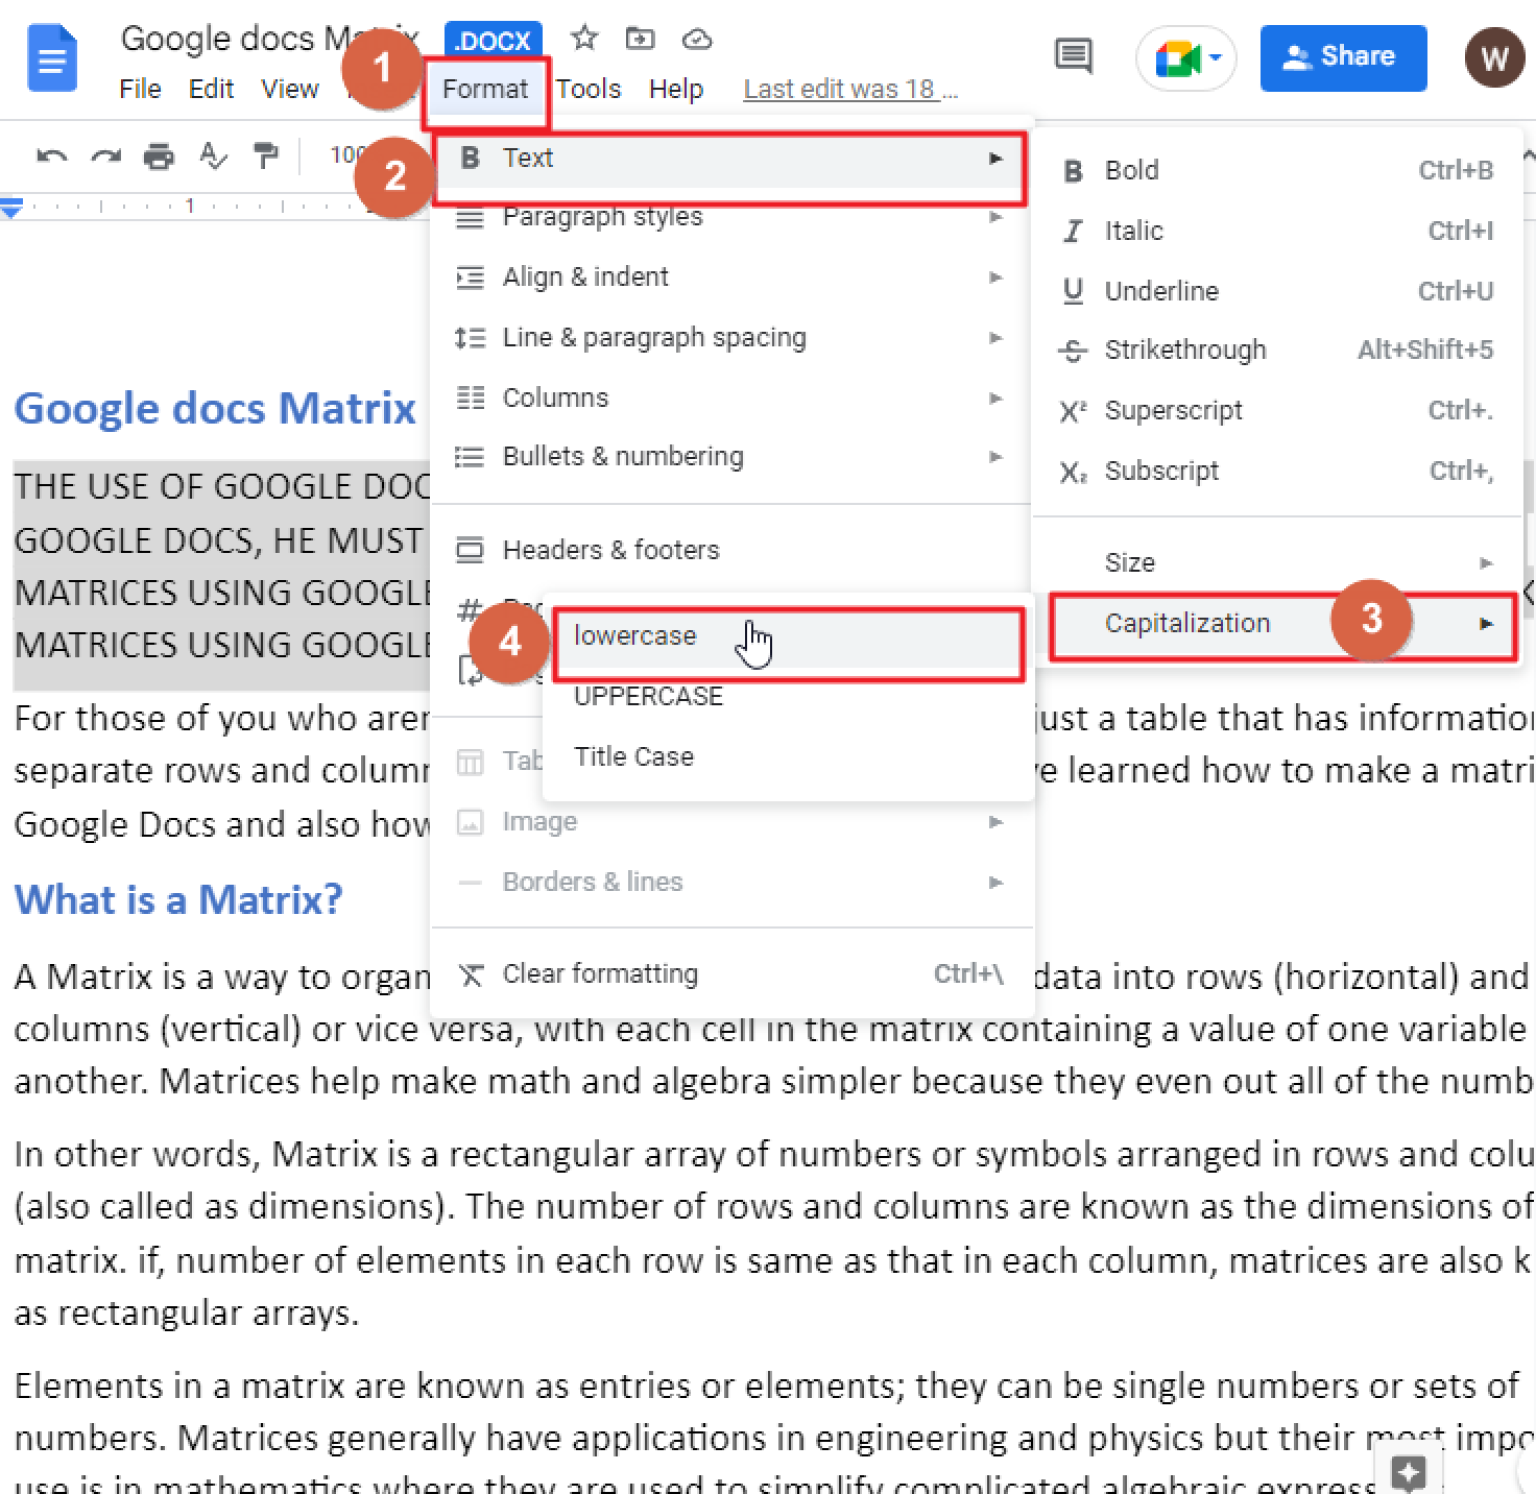 how-to-do-small-caps-in-google-docs-2-methods-officedemy